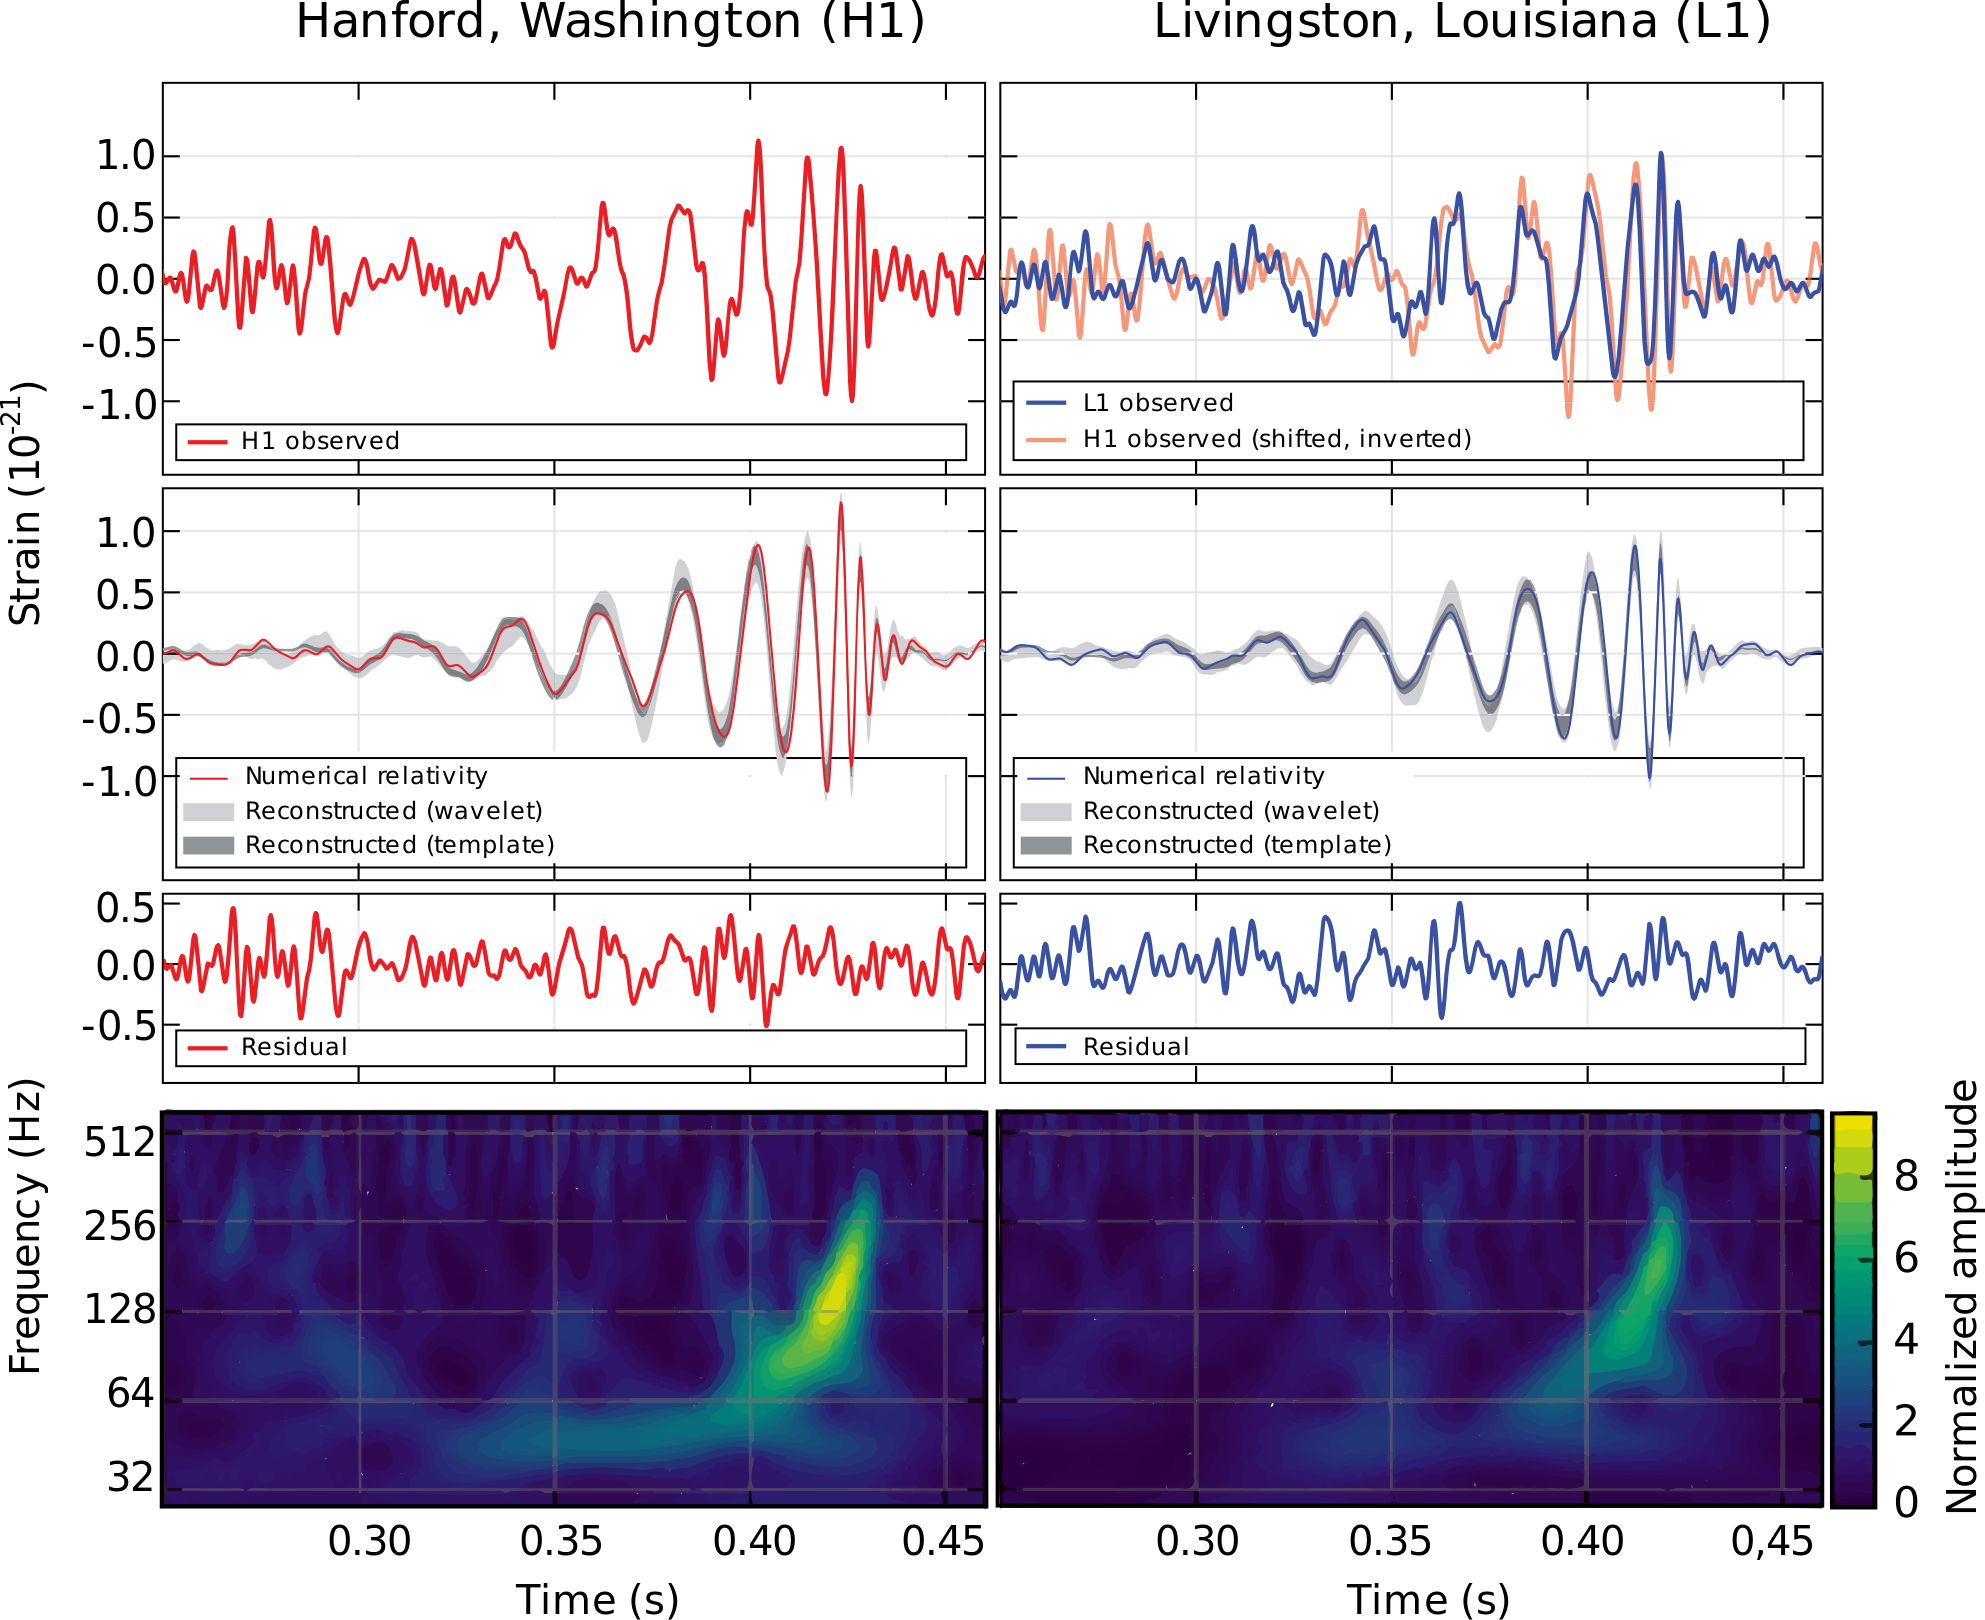 Observed gravitational wave form from GW150914